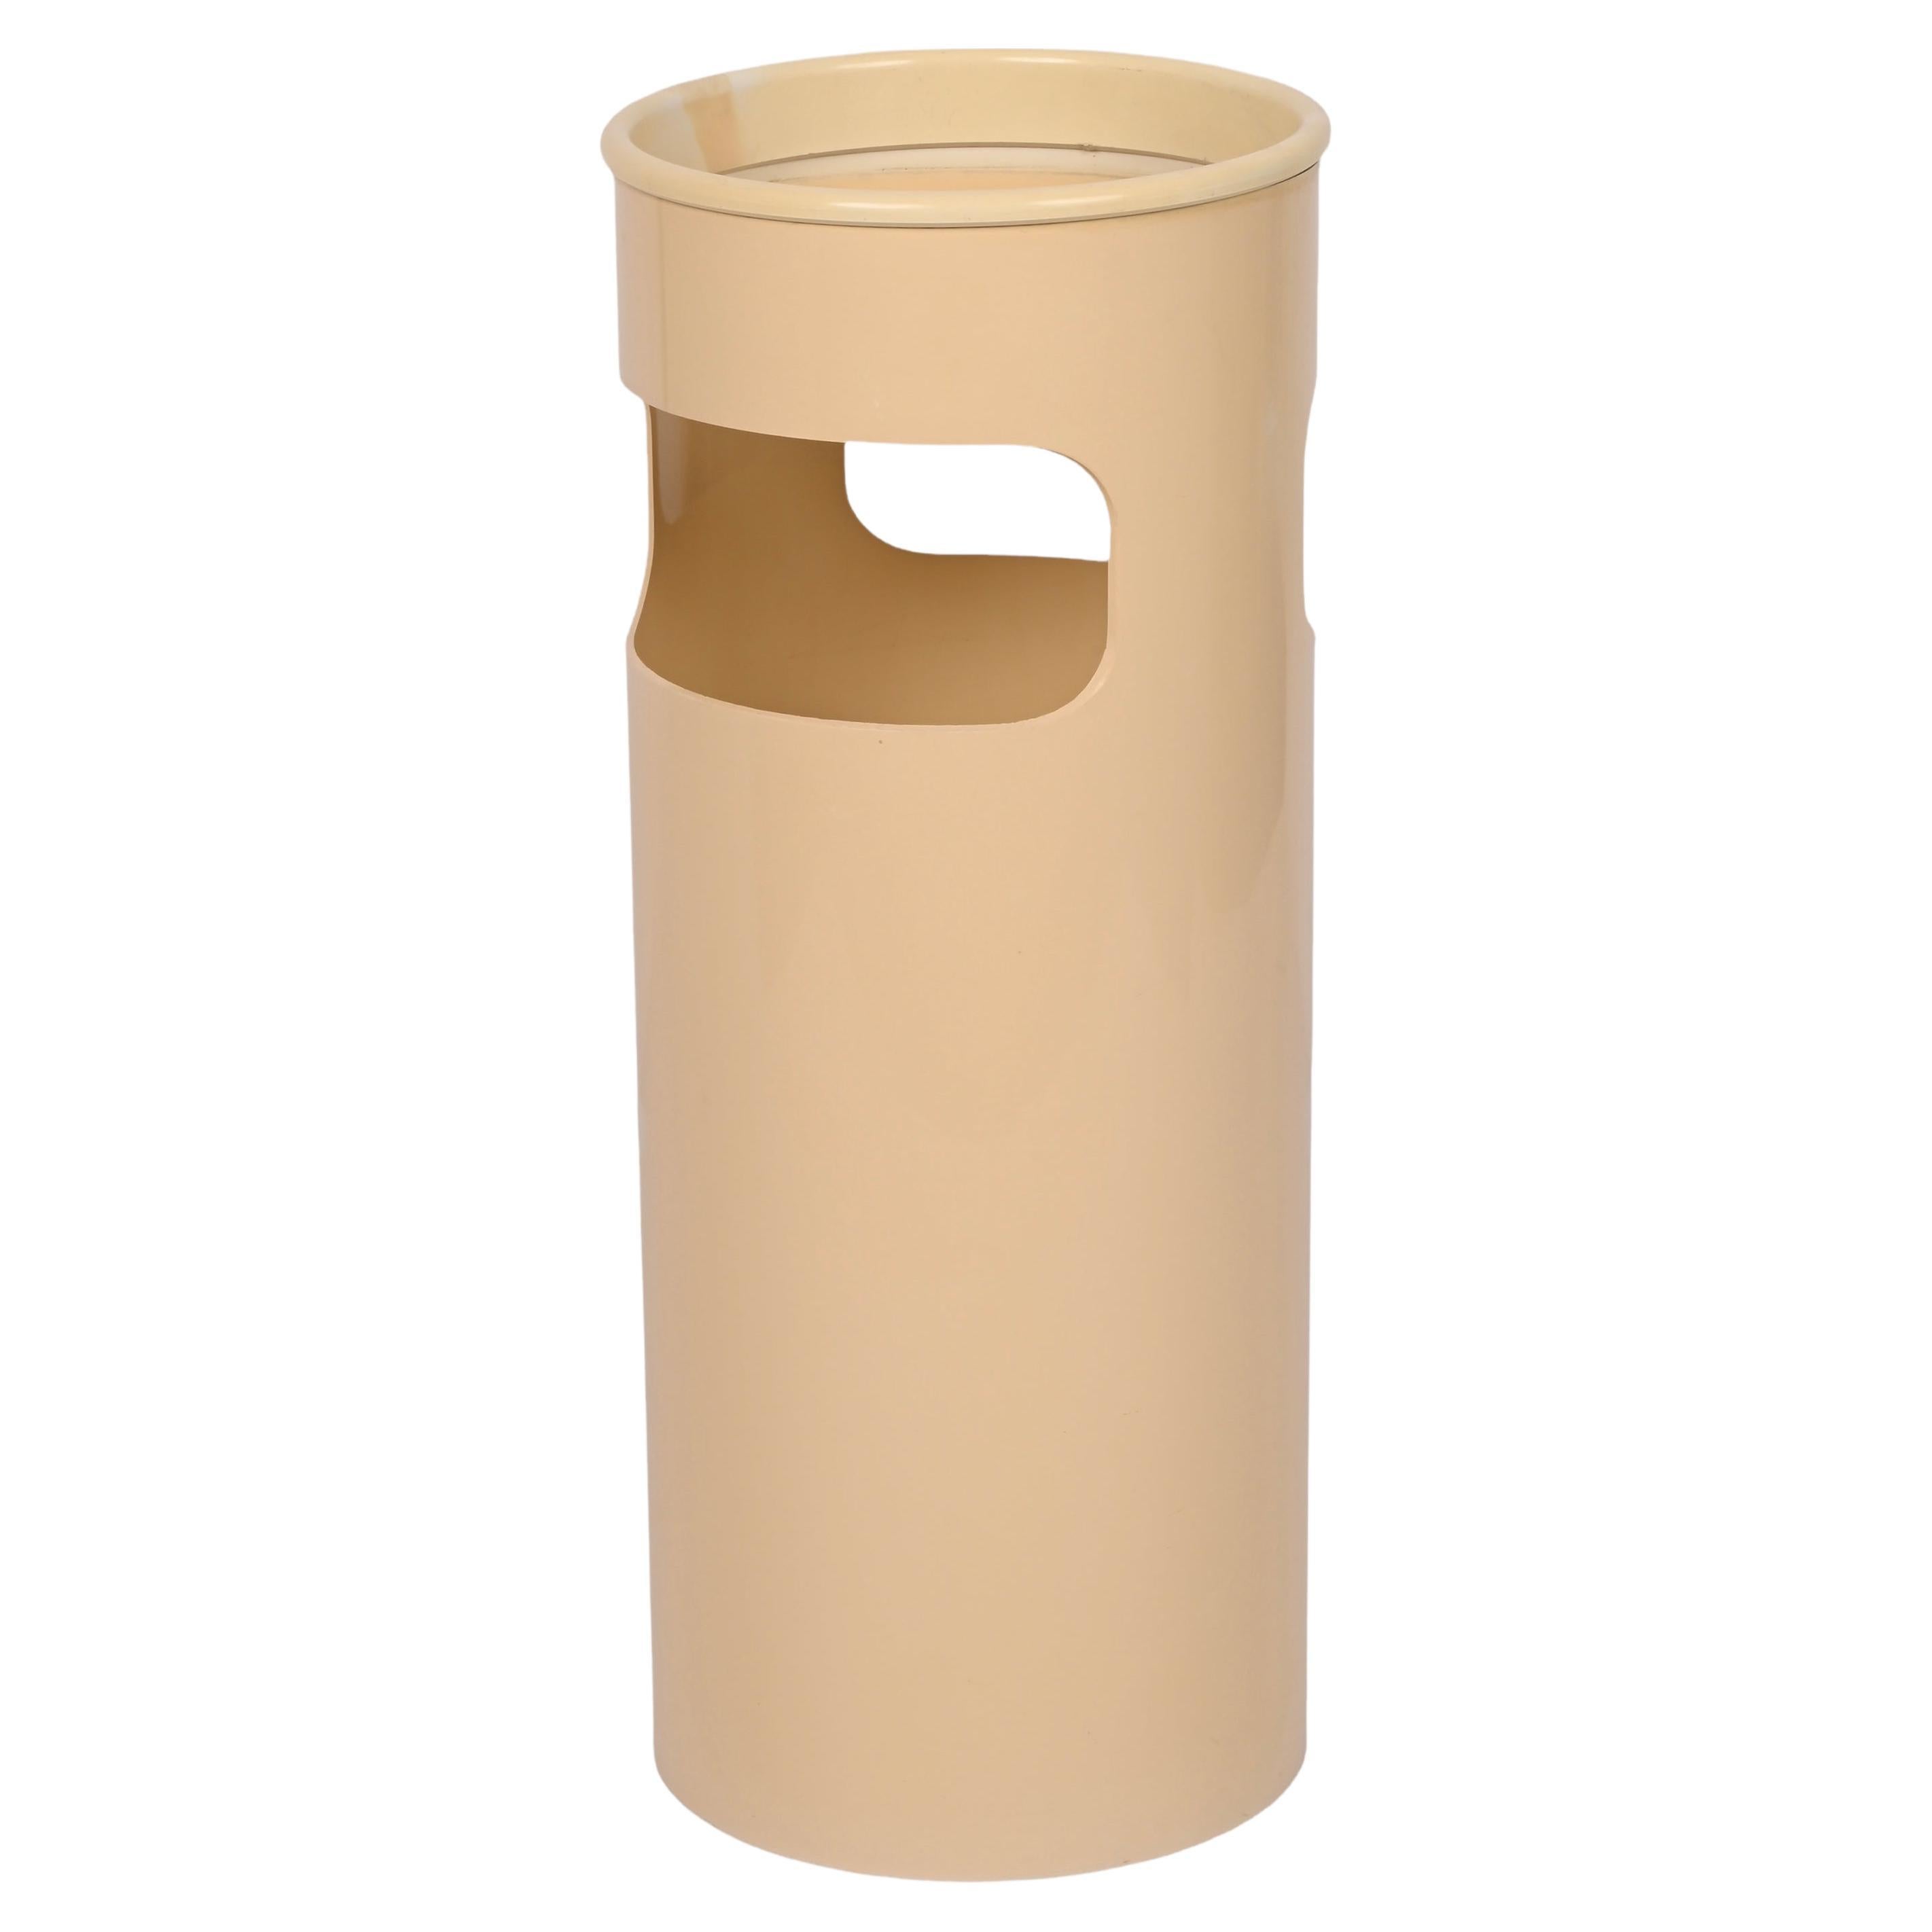 Theme Floral Decoration Colour White-Beige G.B Cylindrical Umbrella Stand in Perforated Metal AGED TO ART 